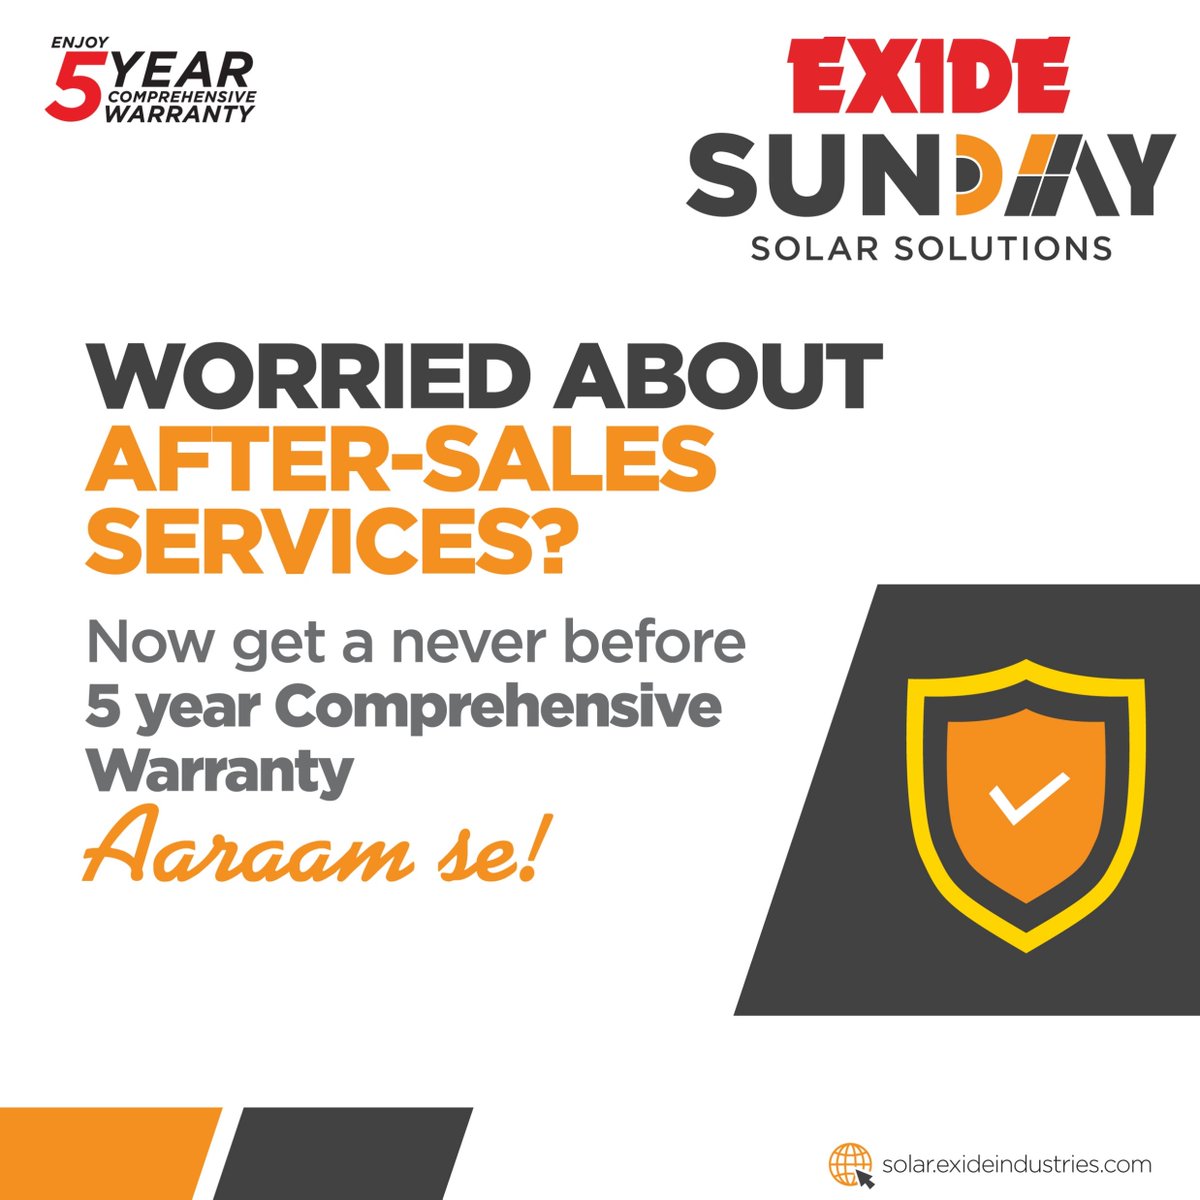 Post installation care and after-sales services can be a hassle.
With Exide Sunday’s 5 year comprehensive warranty, the first in its category, you can stay worry free and live Aaraam Se!
solar.exideindustries.com
#Exide #SustainableEnergy #SundayLiving #ExideSolar